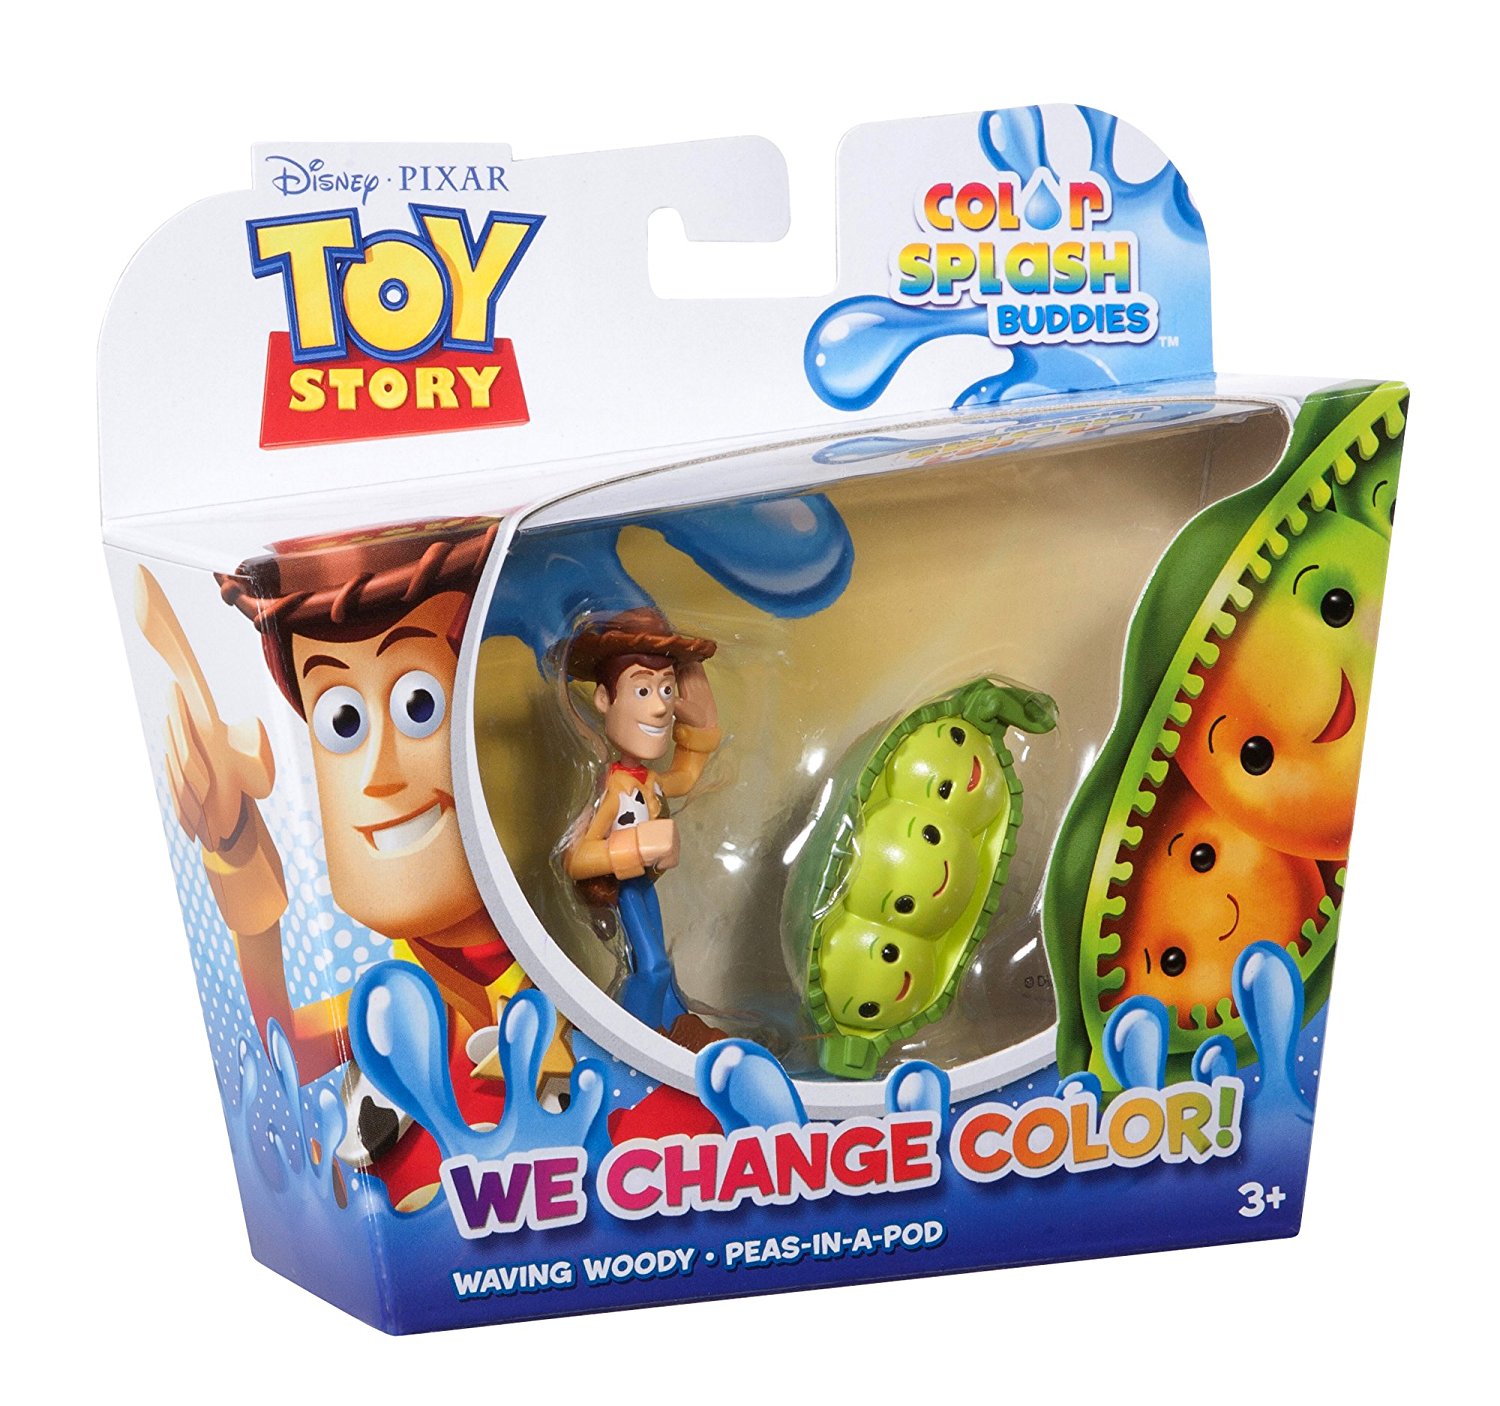 Amazon.com: Toy Story Color Splash Buddies Waving Woody and Peas in ...